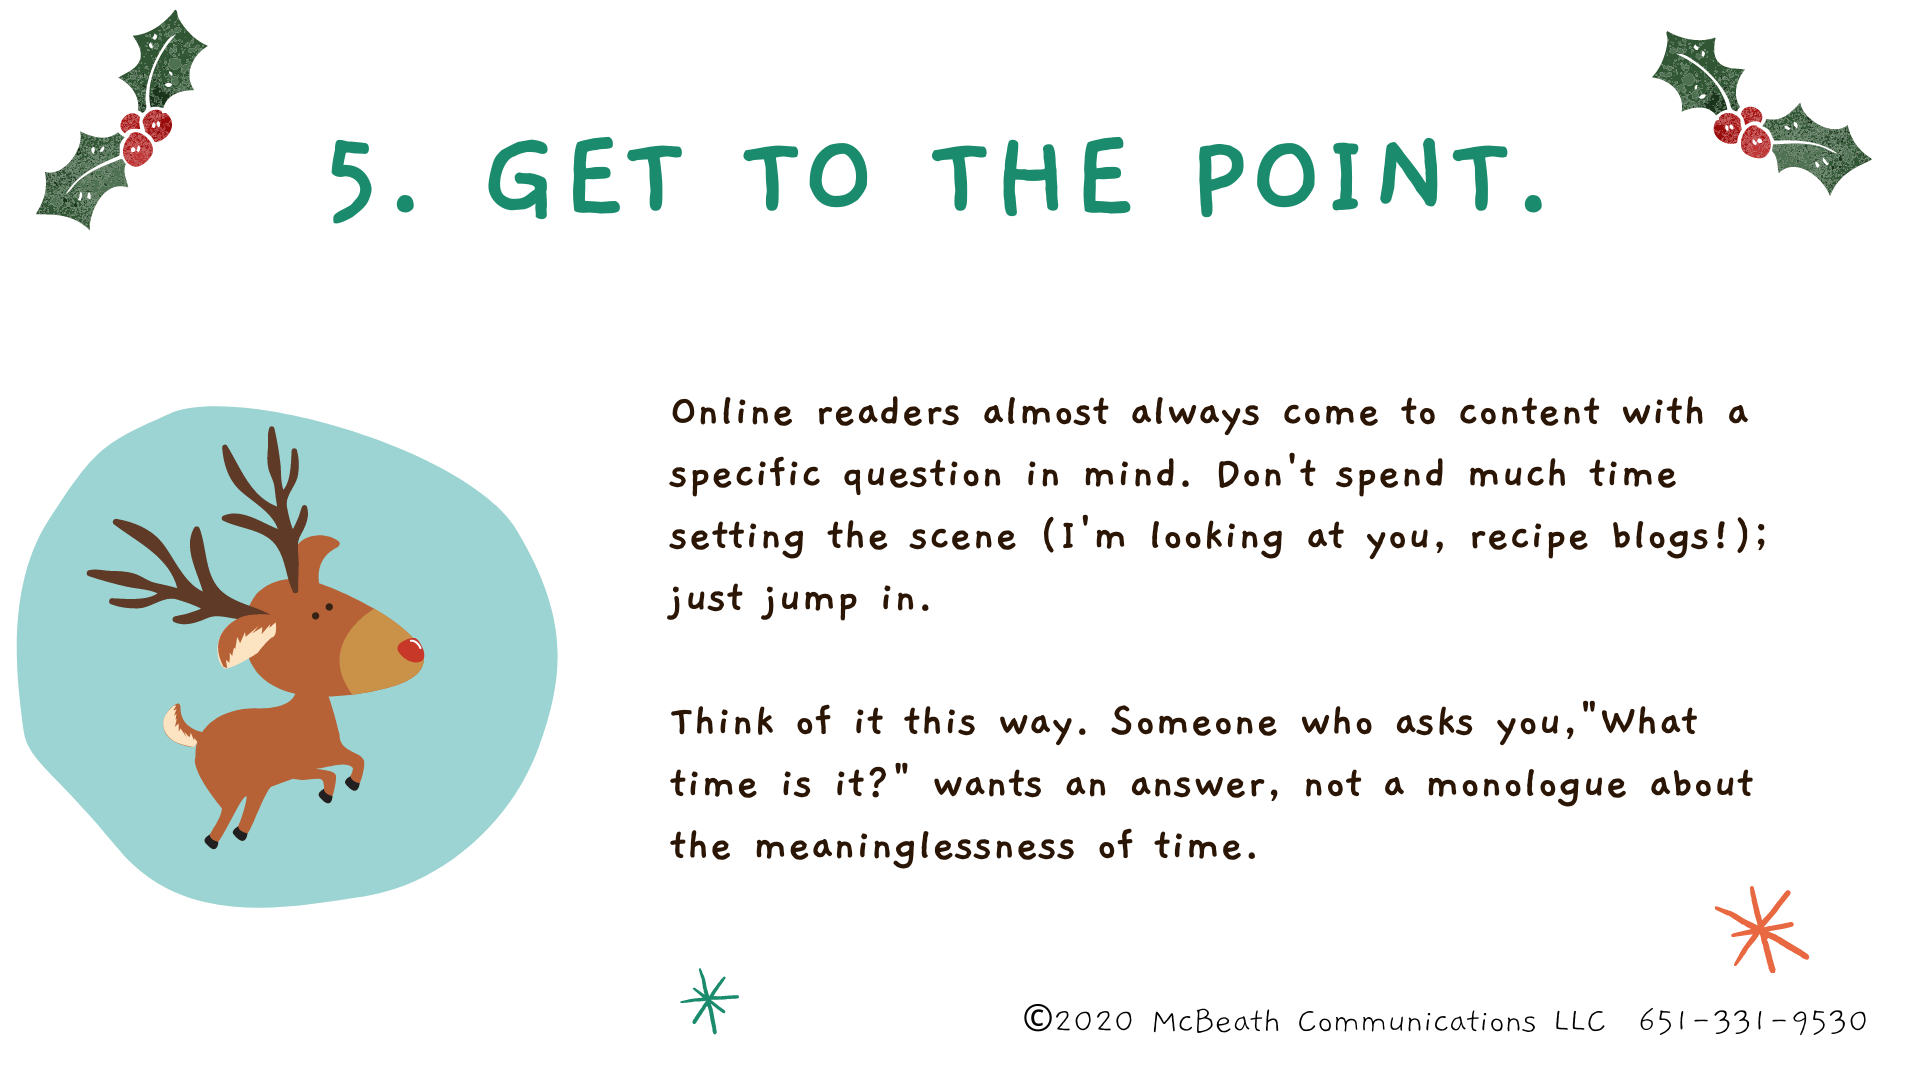 Get to the point